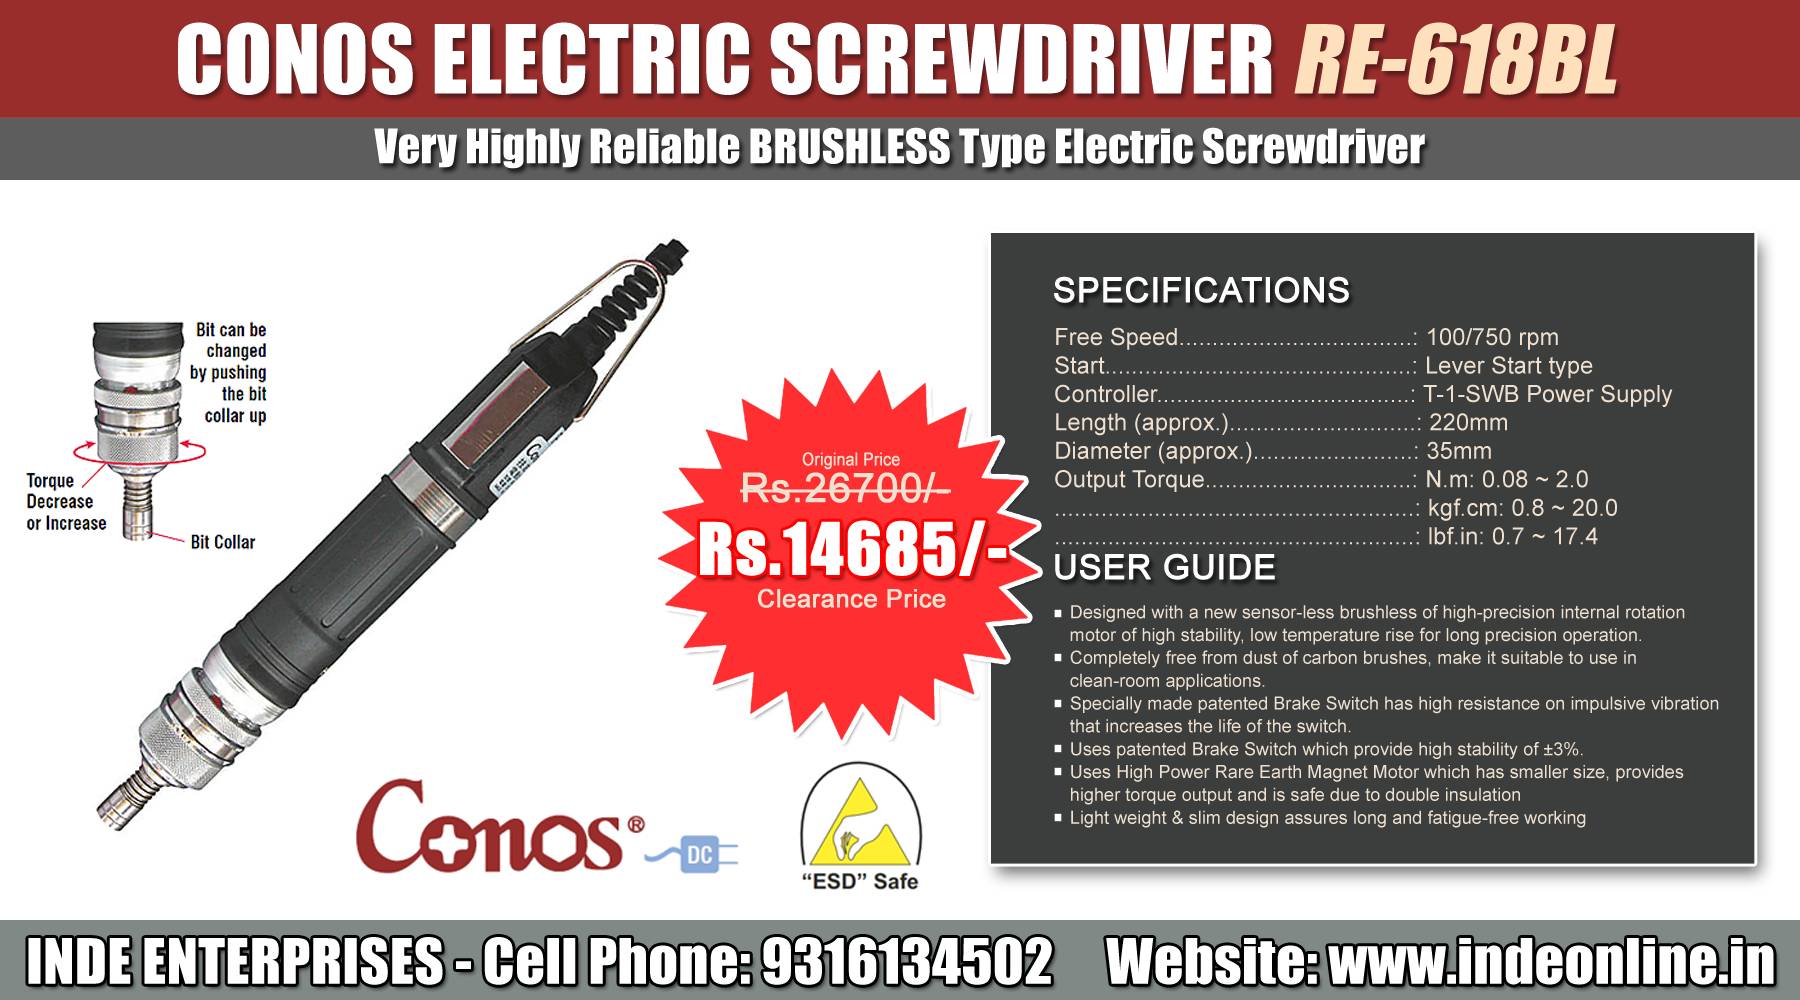 CONOS Electric Screwdriver - RE-618BL Price Rs.14685/-